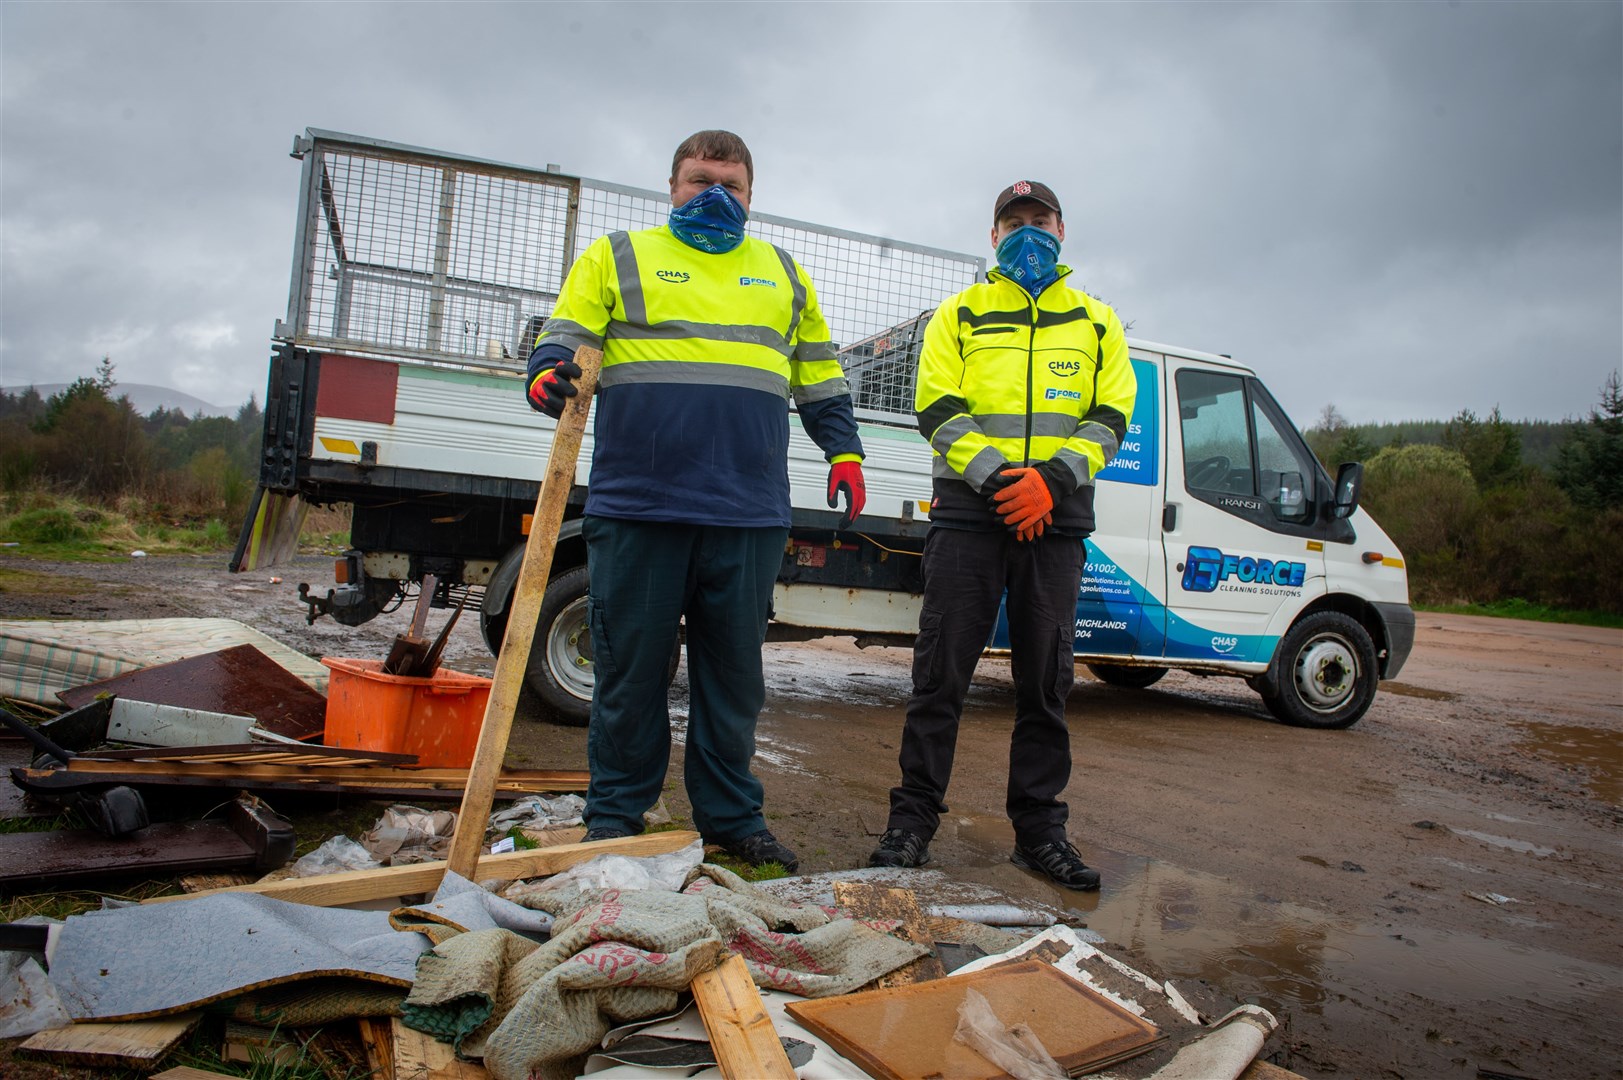 Michael Gliniecki and Liam Urquhart of G-Force removing the rubbish. Picture: Callum Mackay